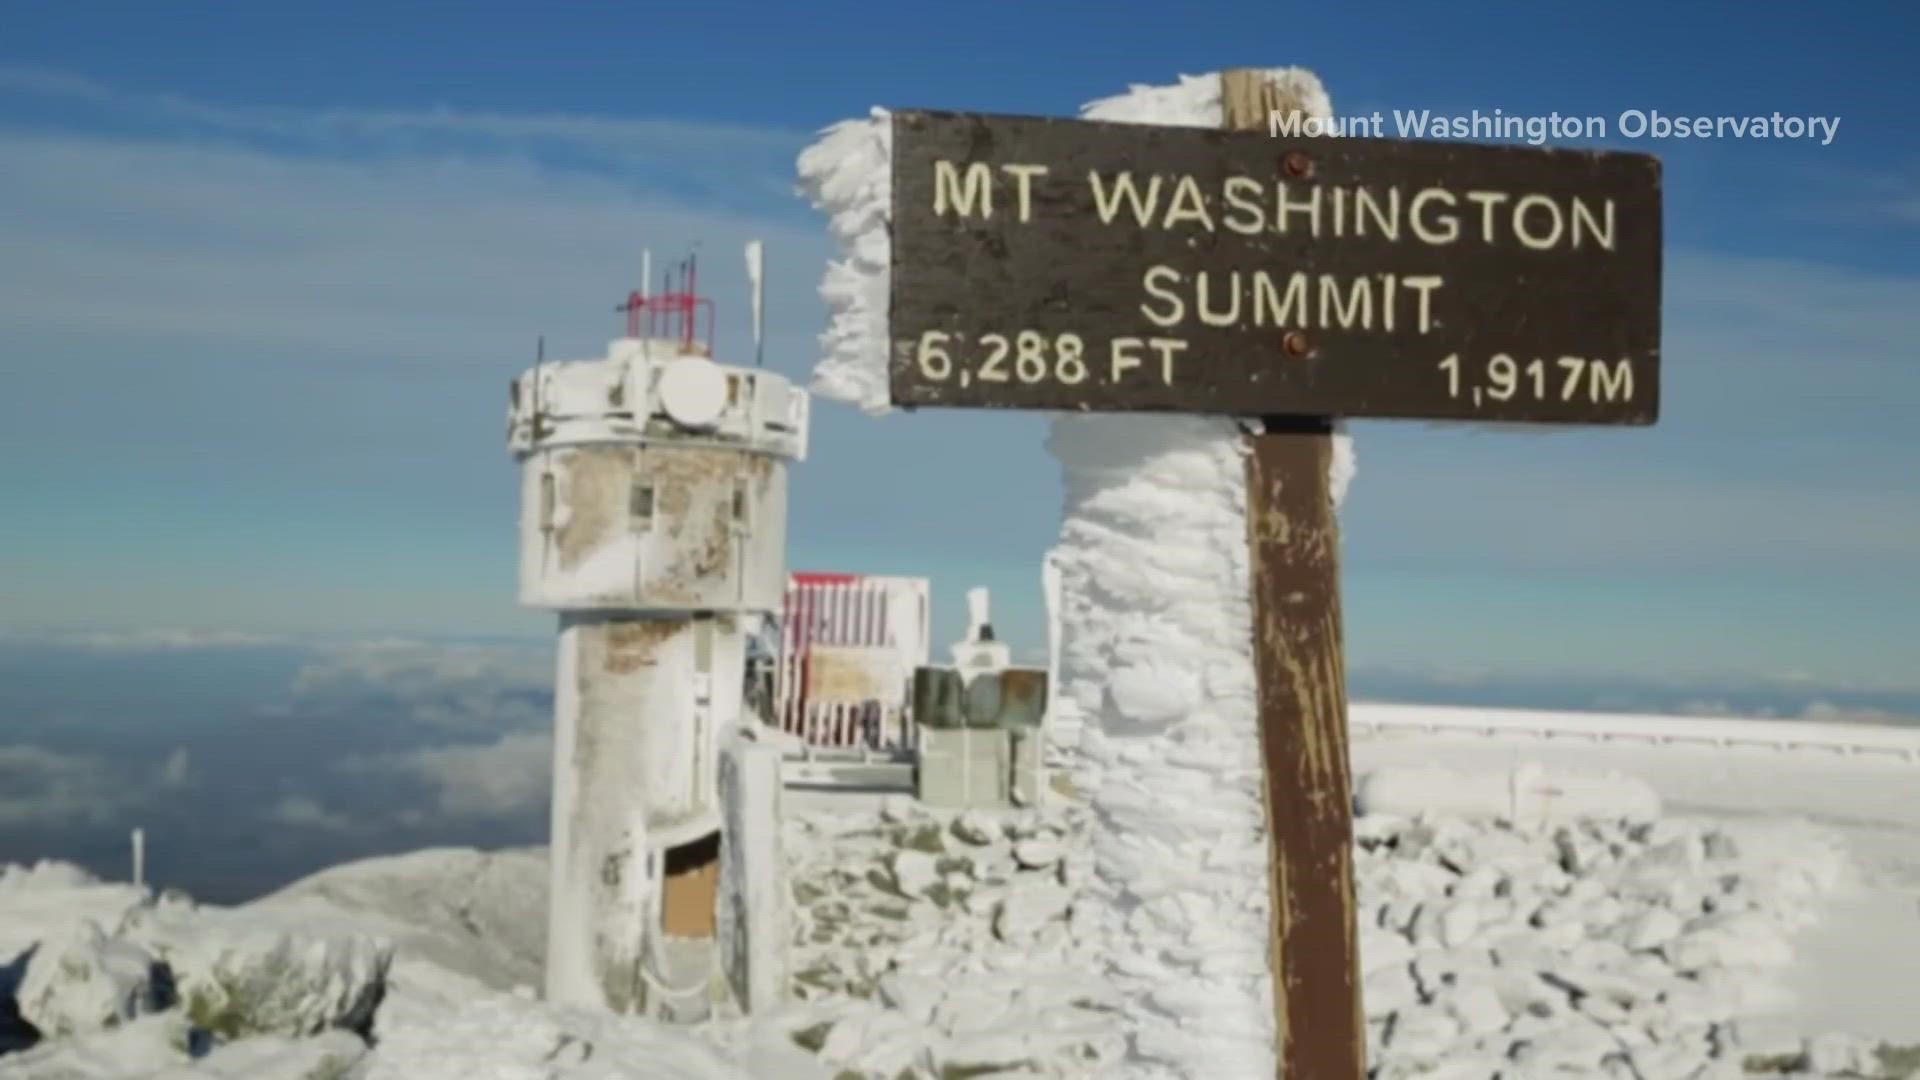 The latest models predict low temperatures could reach 50 degrees below zero at the summit, one meteorologist said.